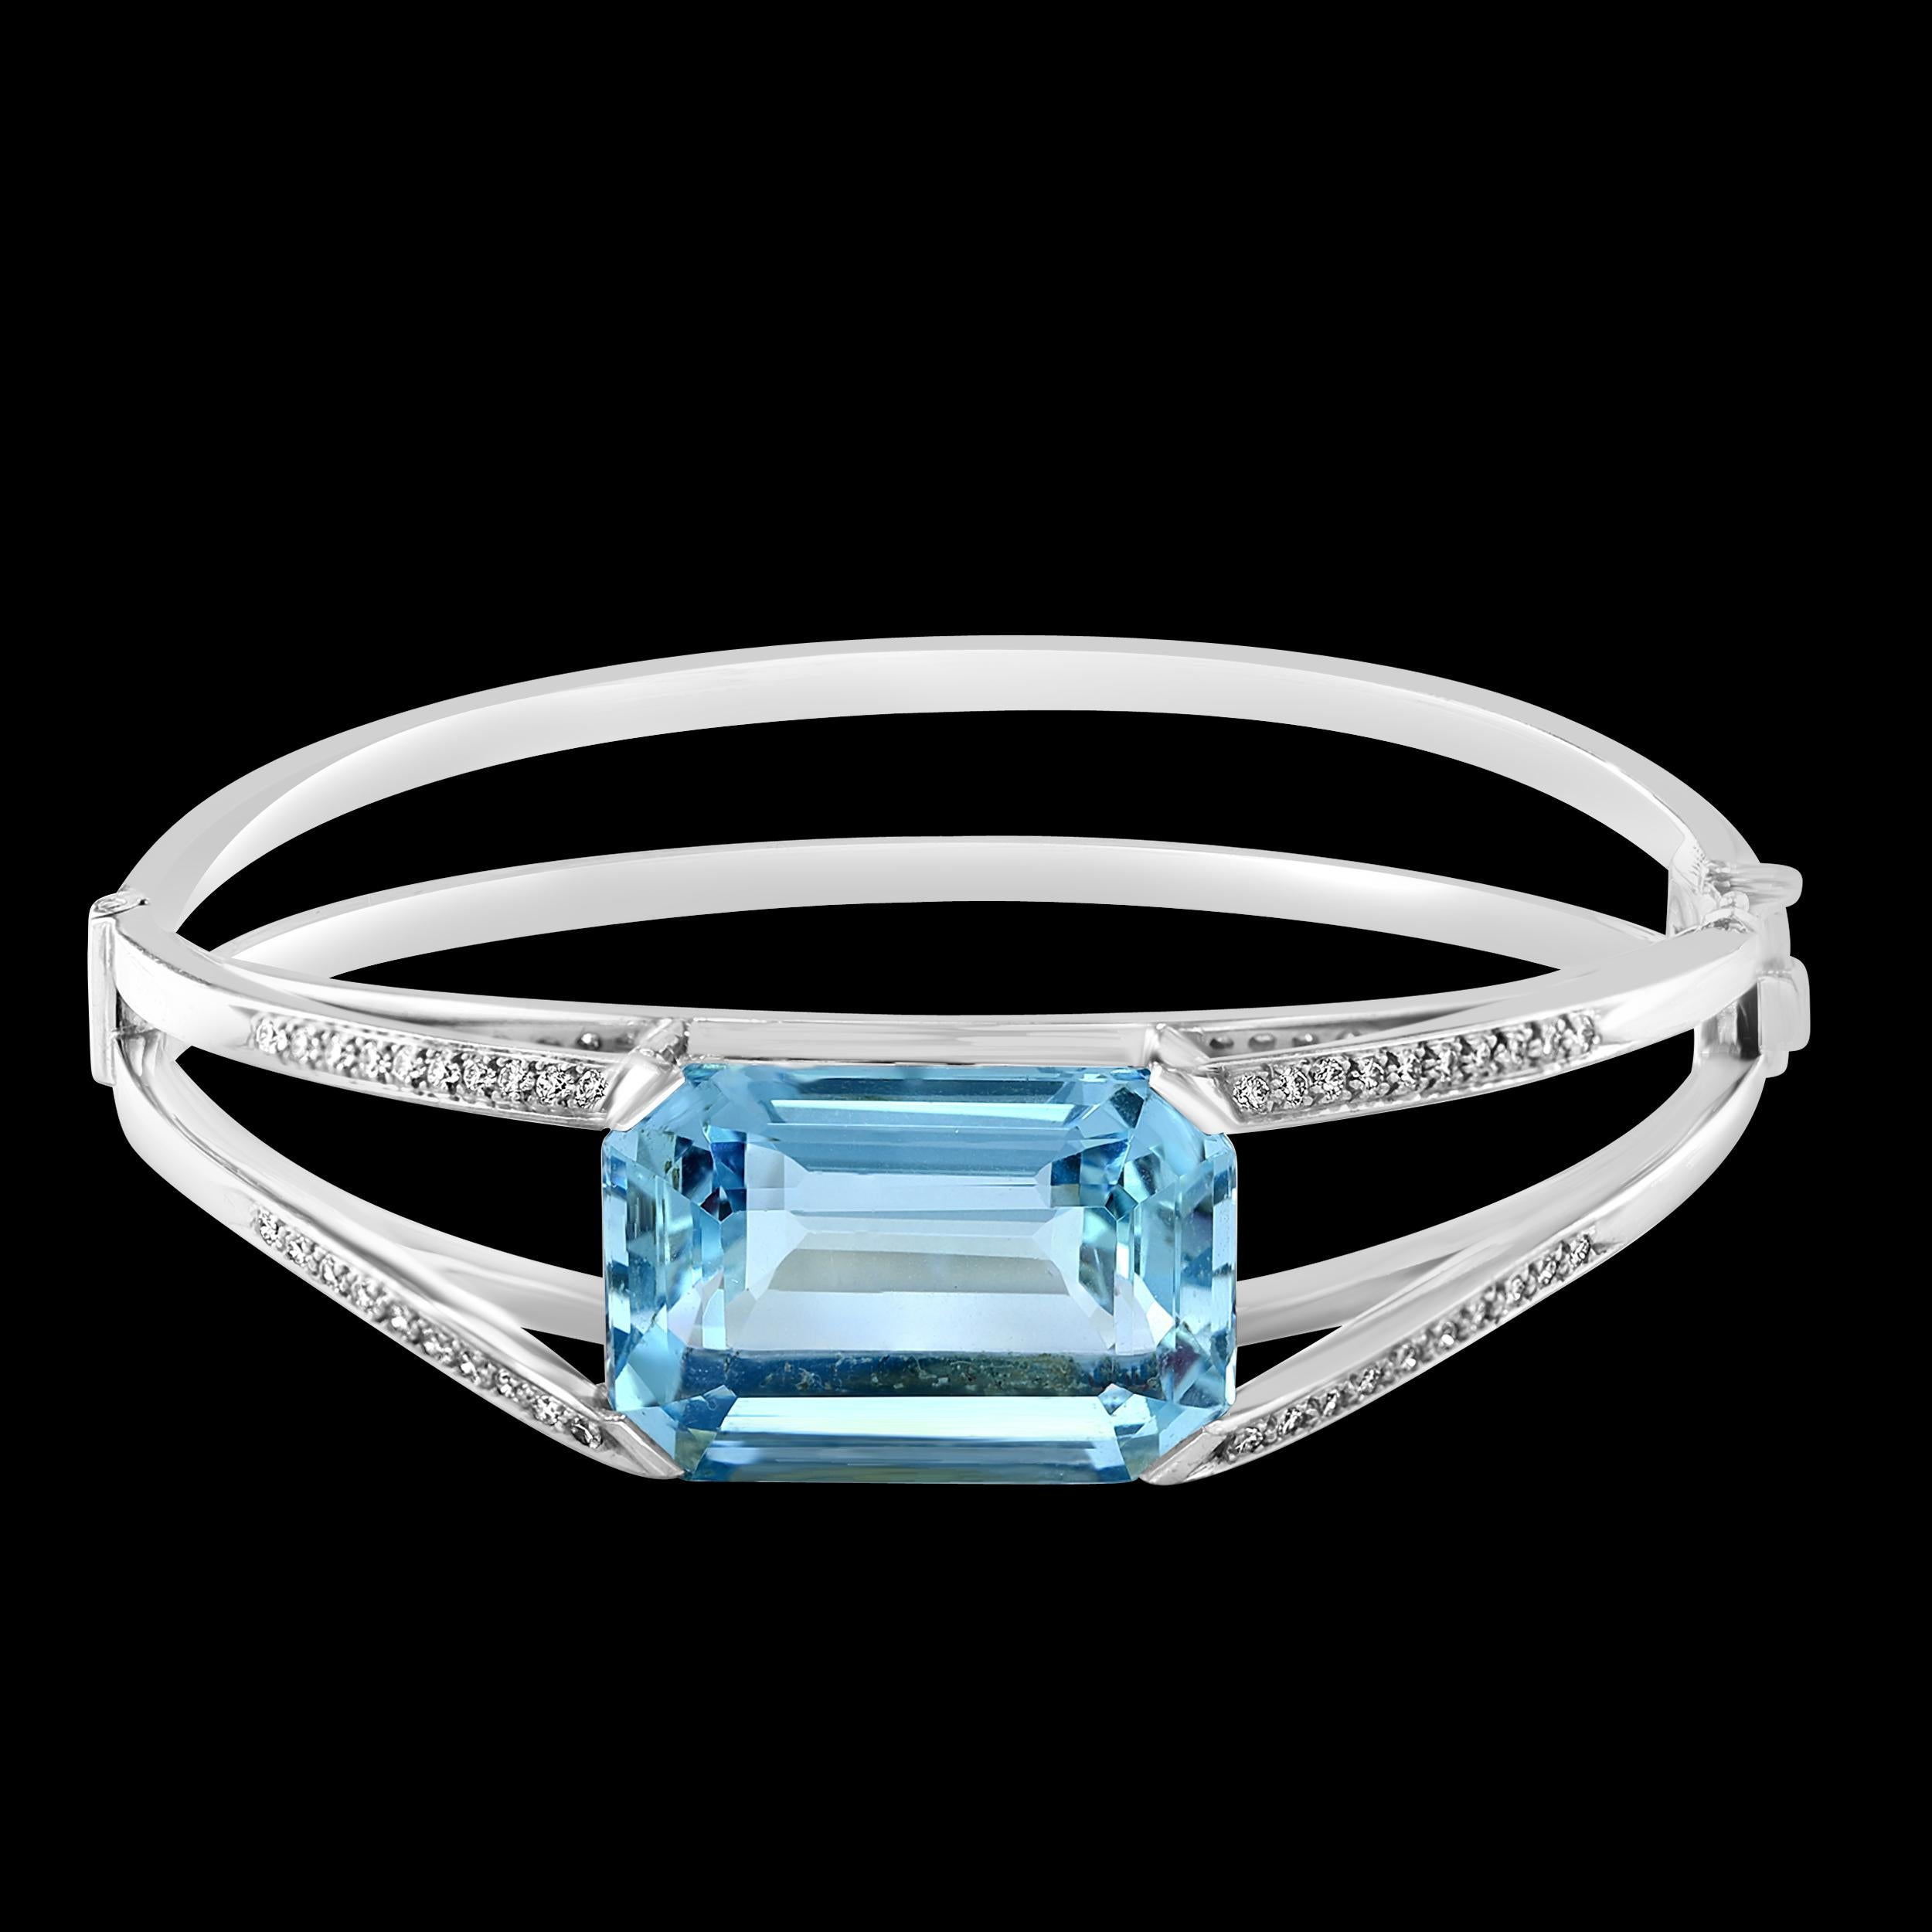 32 Ct Natural Aqua & Diamond Bangle /Bracelet in 18 Karat White Gold 46 Grams
It features a bangle style  Bracelet crafted from  18 karat White gold and embedded with  total approximately 1.2 Carats of Round brilliant diamonds  . 
There is a 32 ct